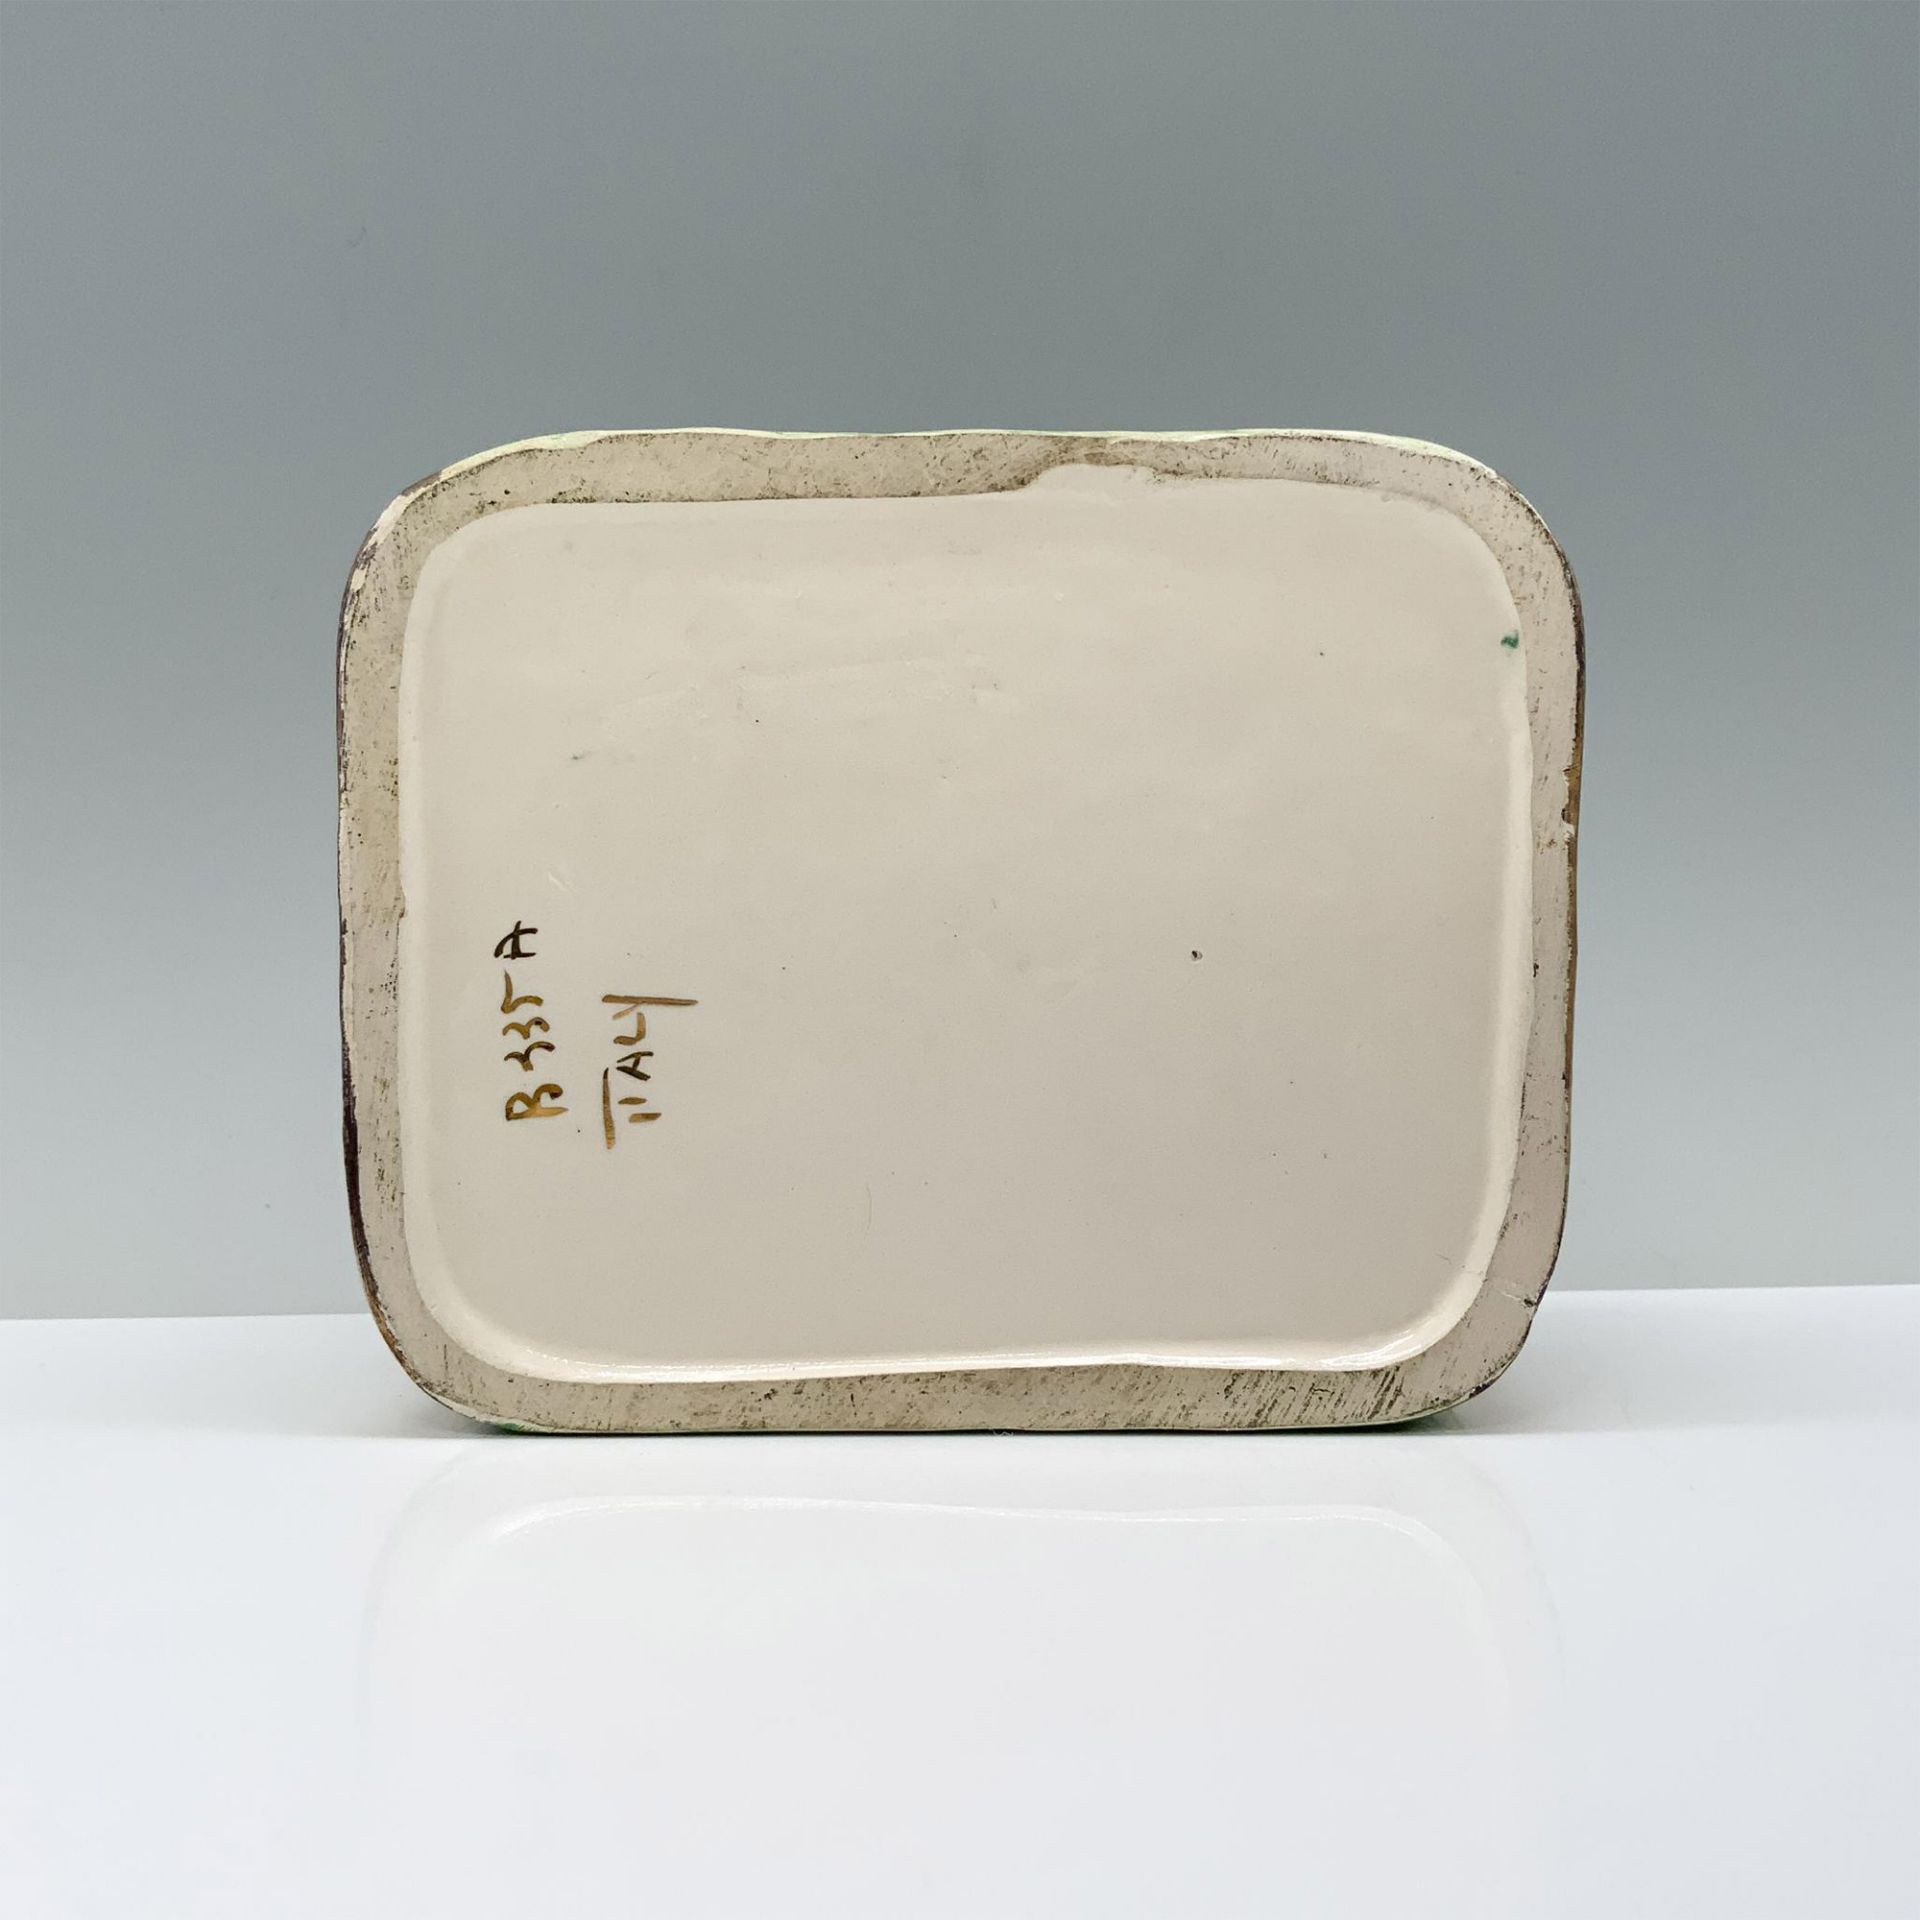 Italian Serving Dish and Lid - Image 3 of 3